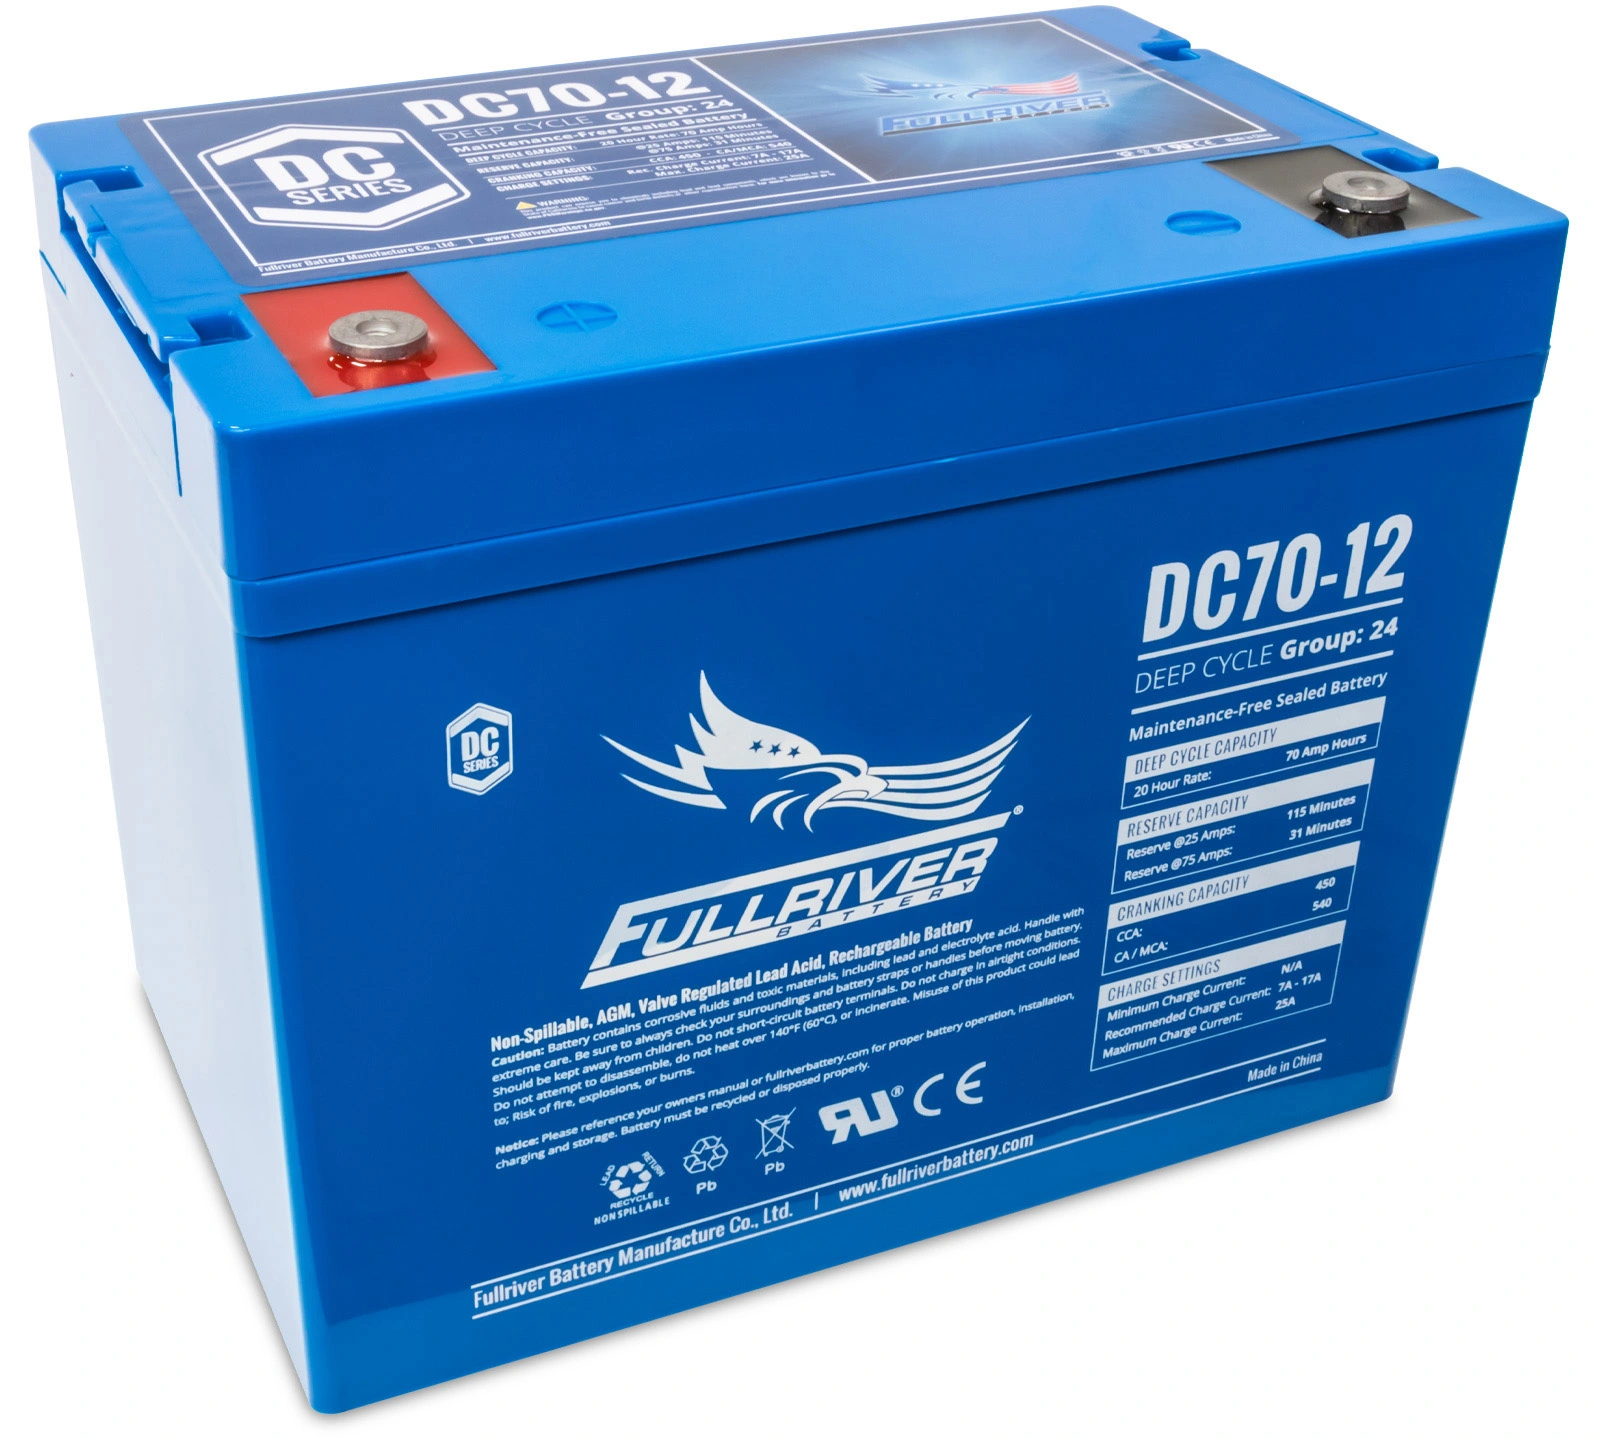 DC Series DC70-12 AGM battery from Fullriver Battery